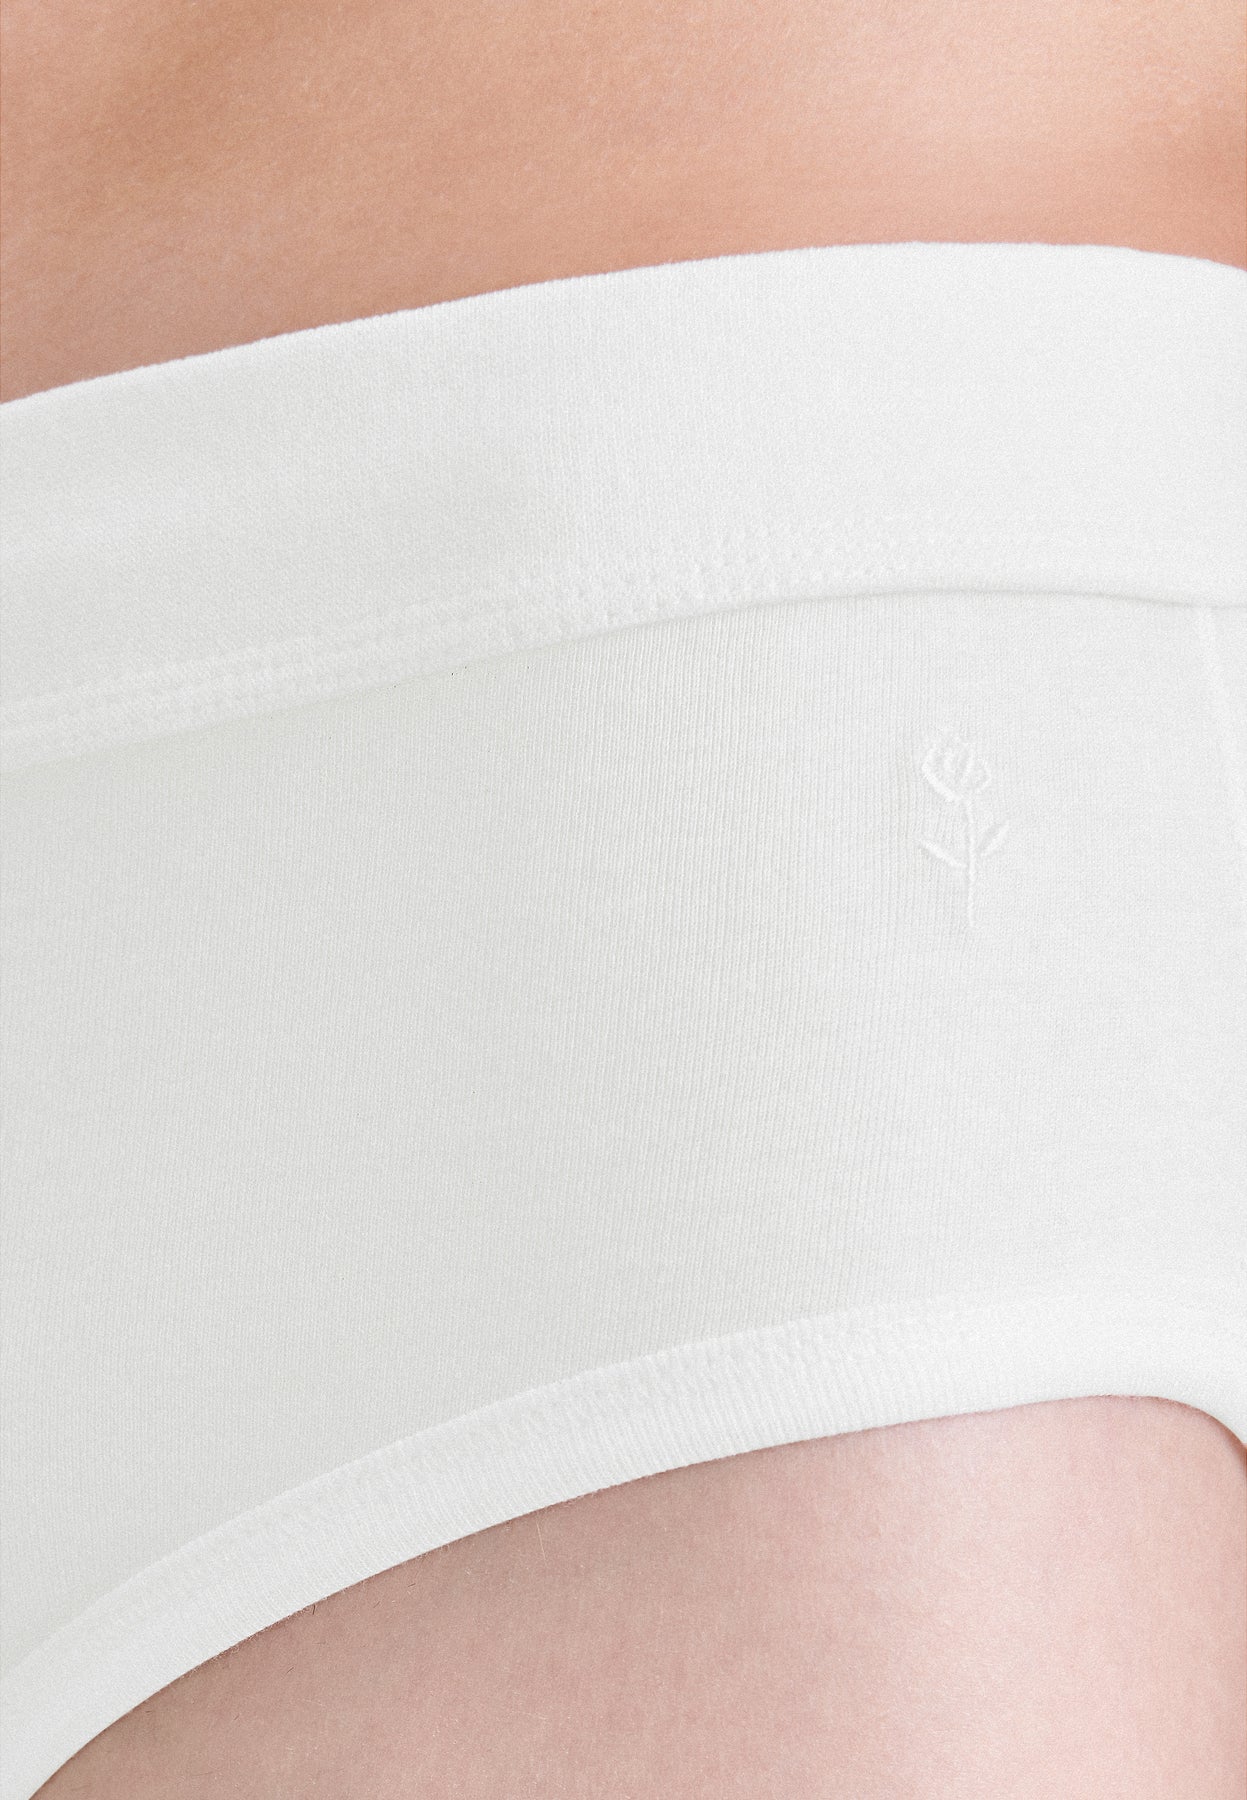 Men's premium classic cotton briefs with fly- white - White - Dilling